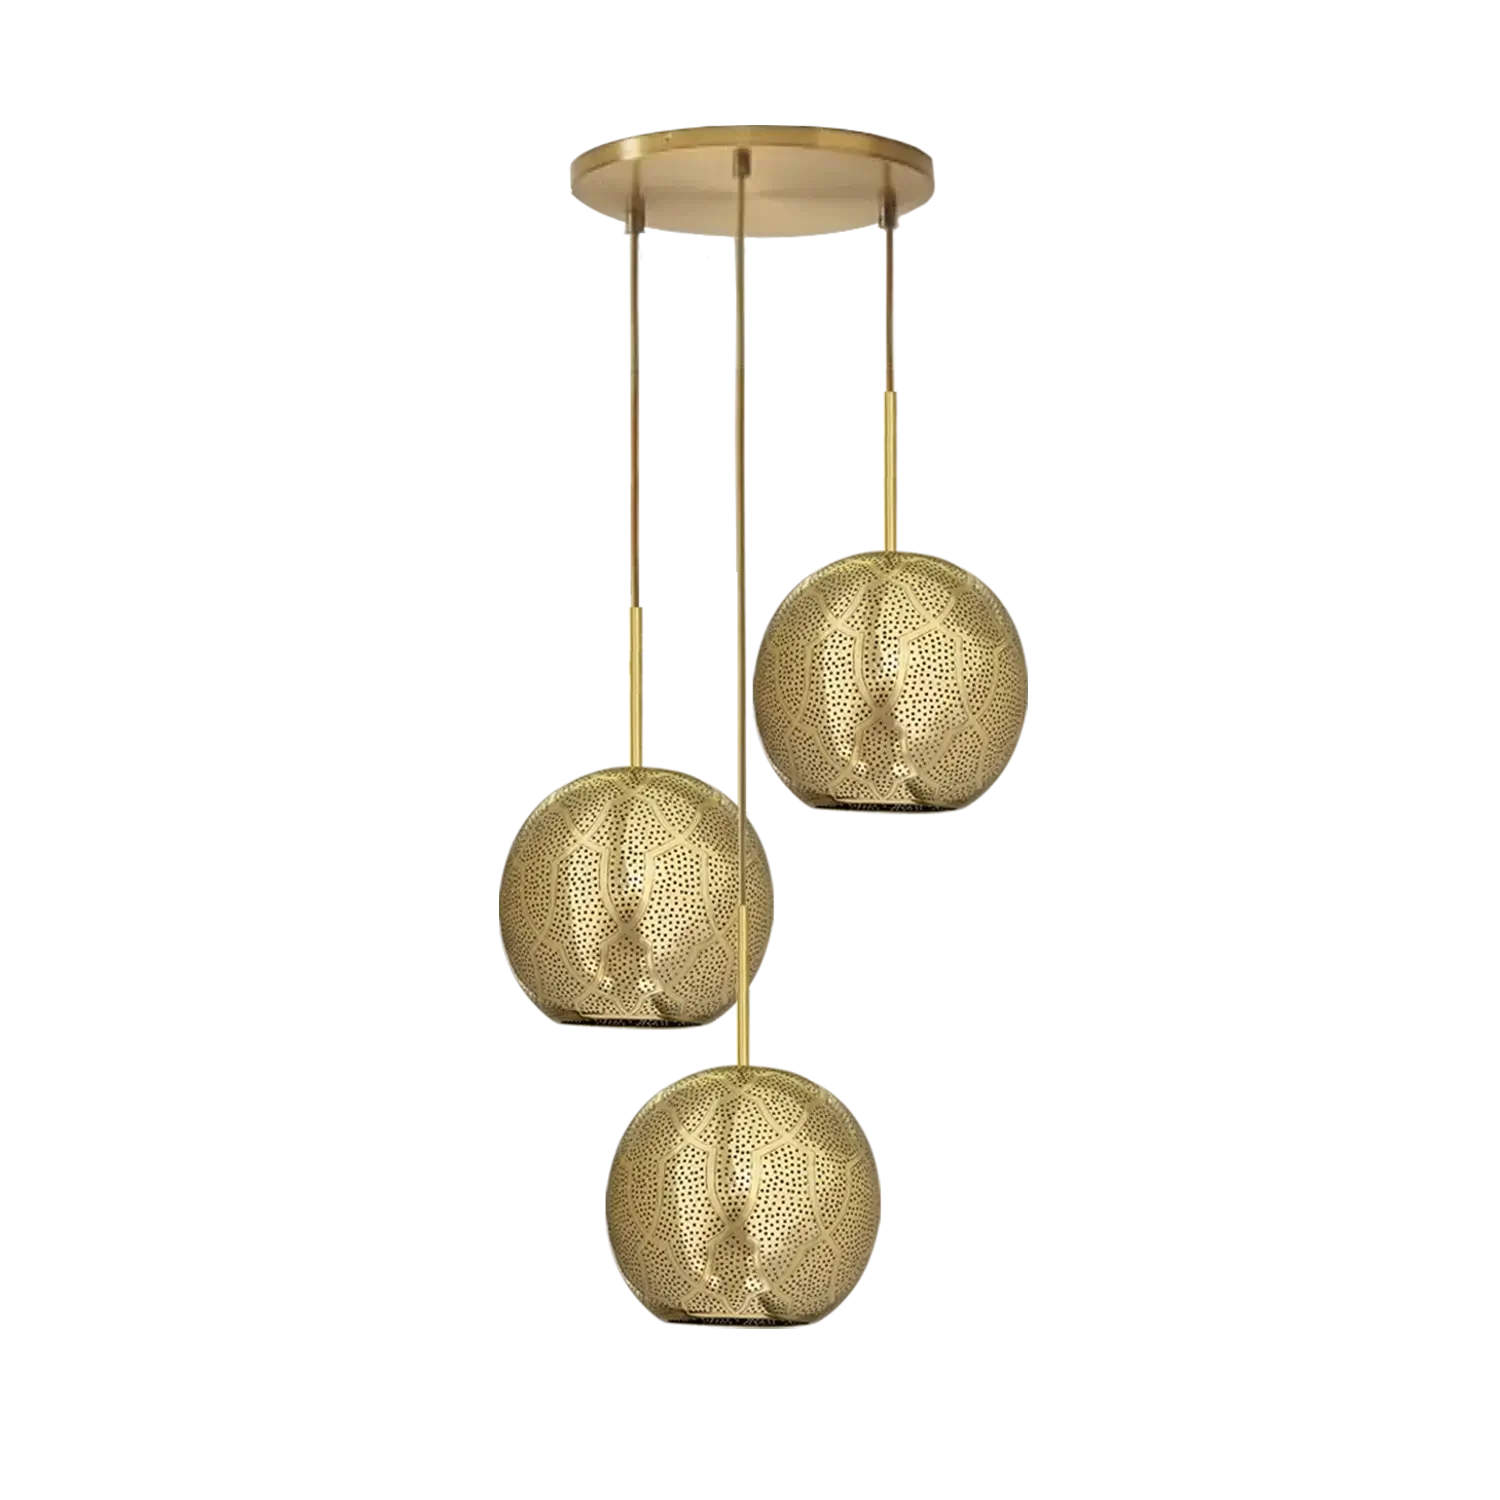 Dounia home Chandelier in polished brass  made of Metal, Model: Ari